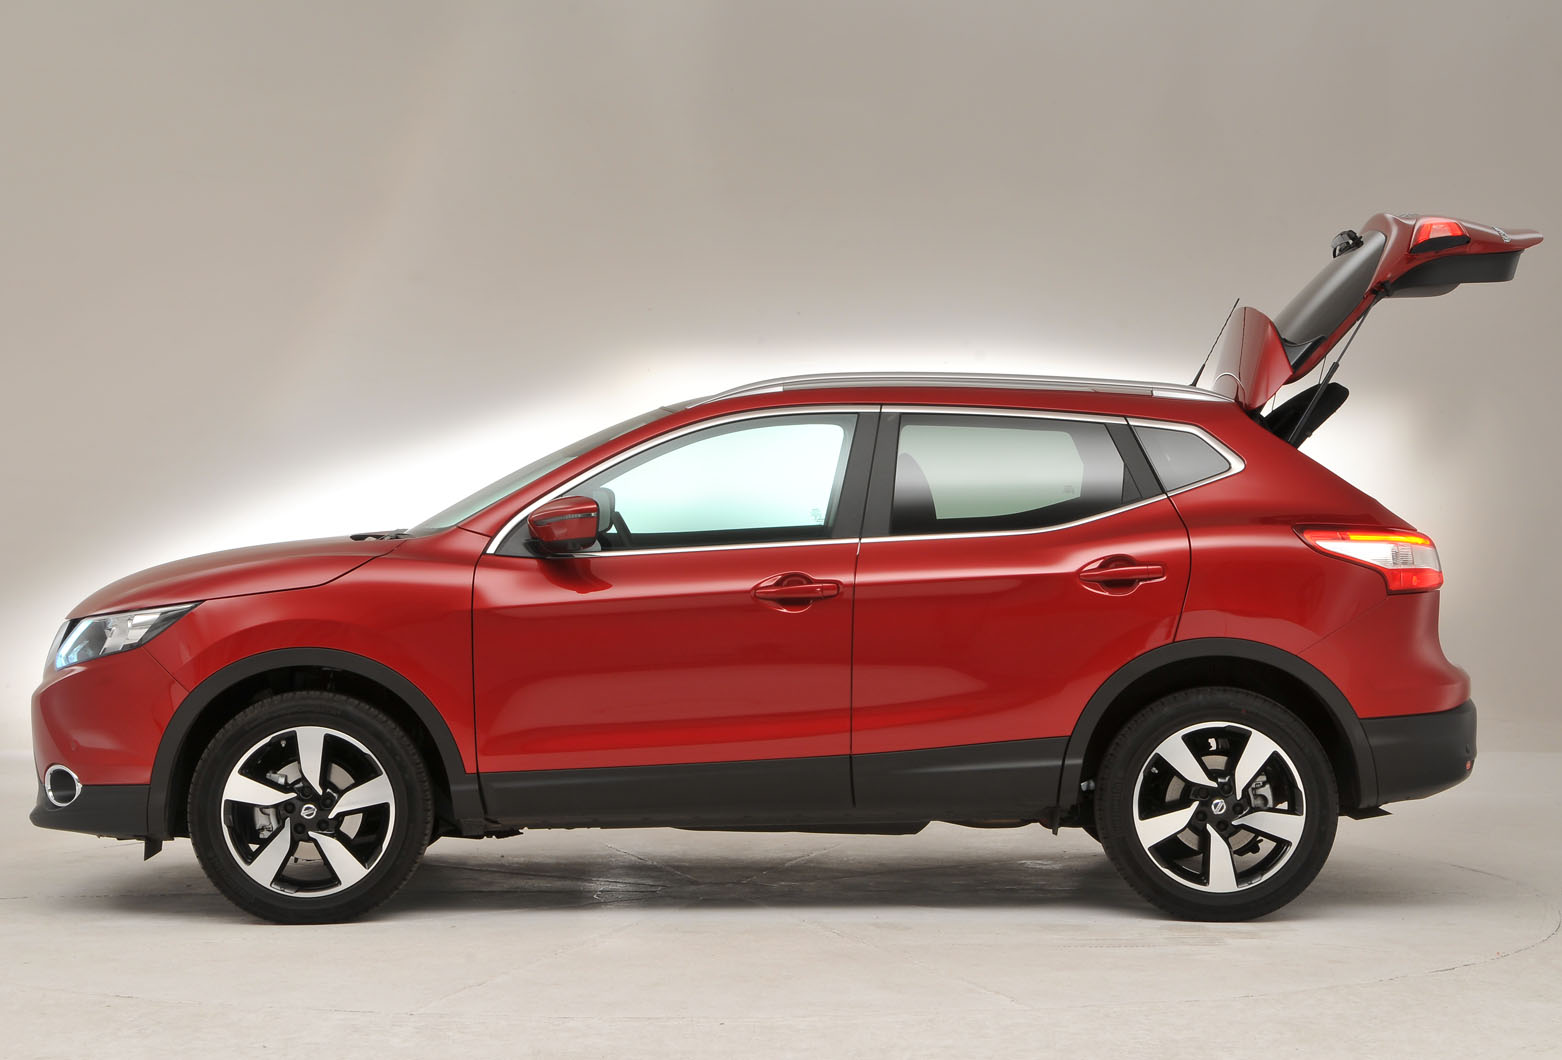 Nearly new buying guide: Nissan Qashqai